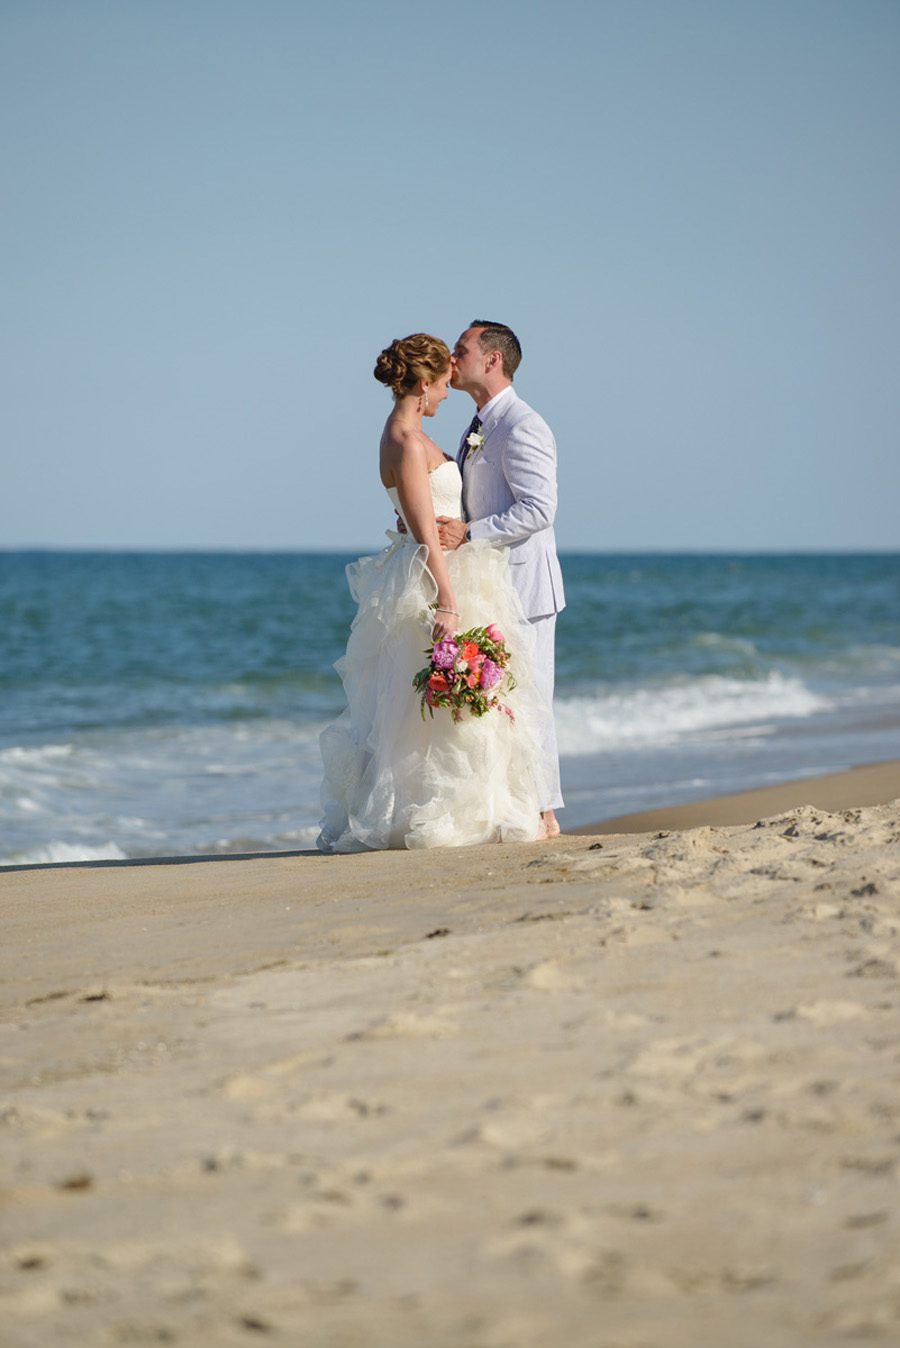 Jessica and Tom's Outer Banks wedding by Neil GT Photography Bride and Groom